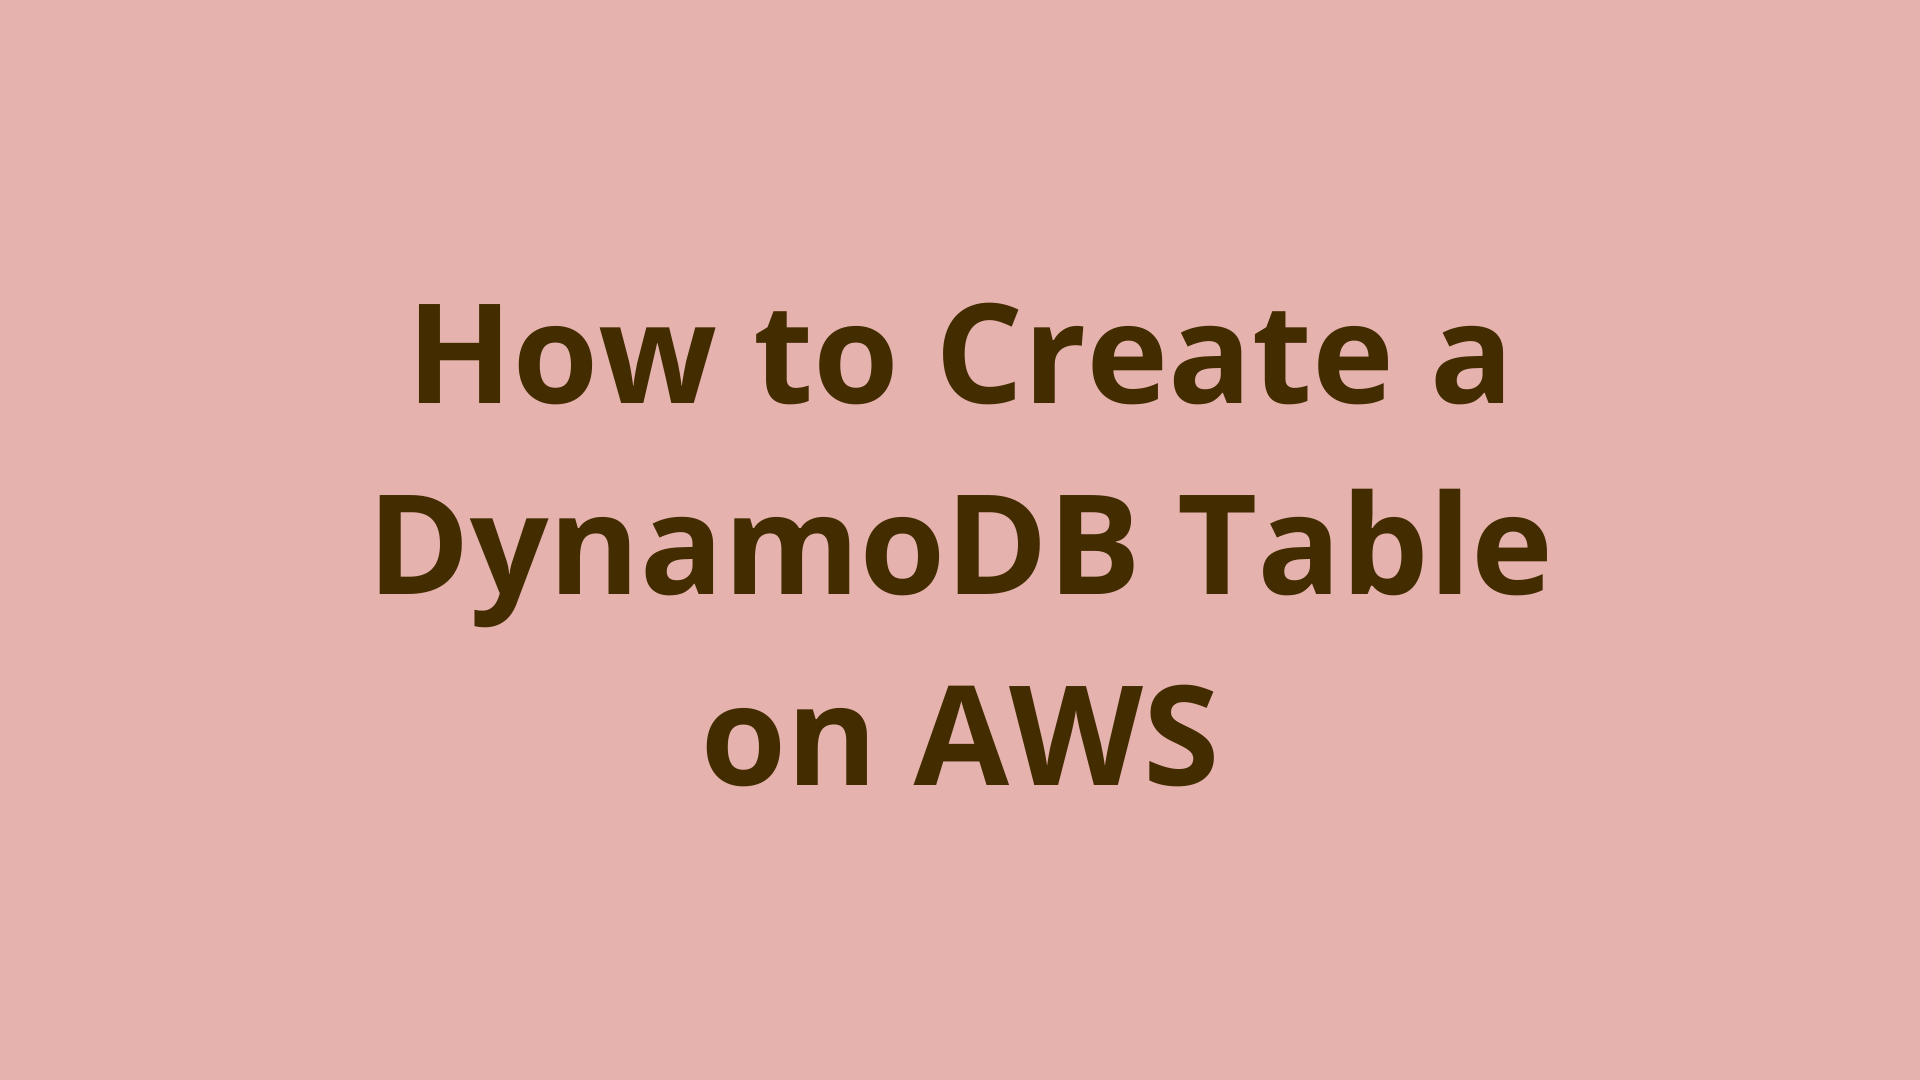 Image of How to create a DynamoDB table on AWS